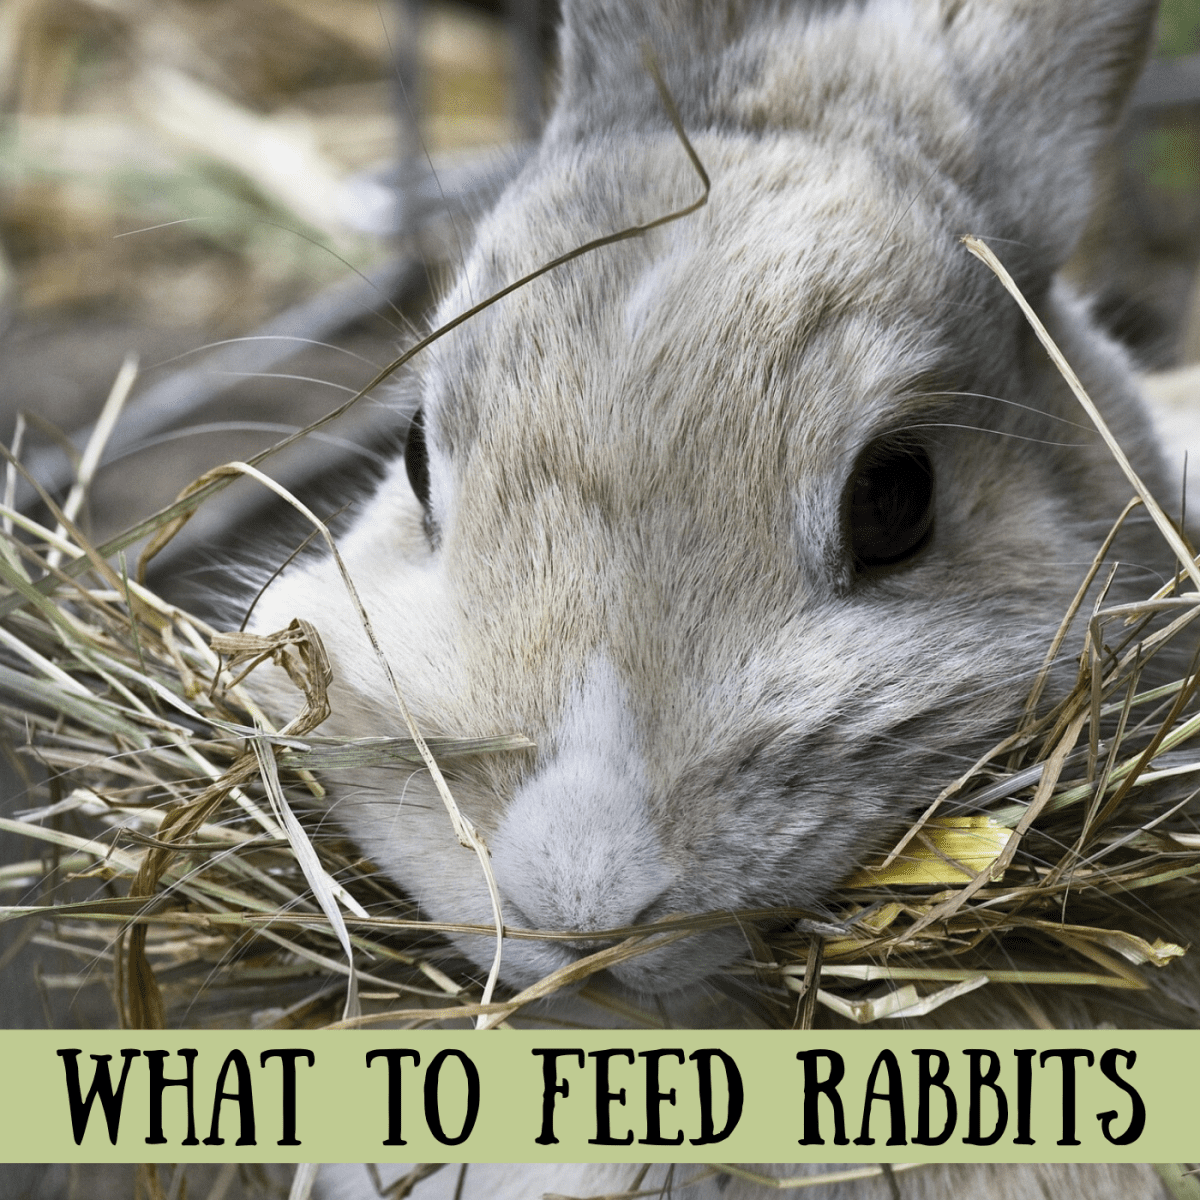 What Should I Feed My Baby Rabbit?